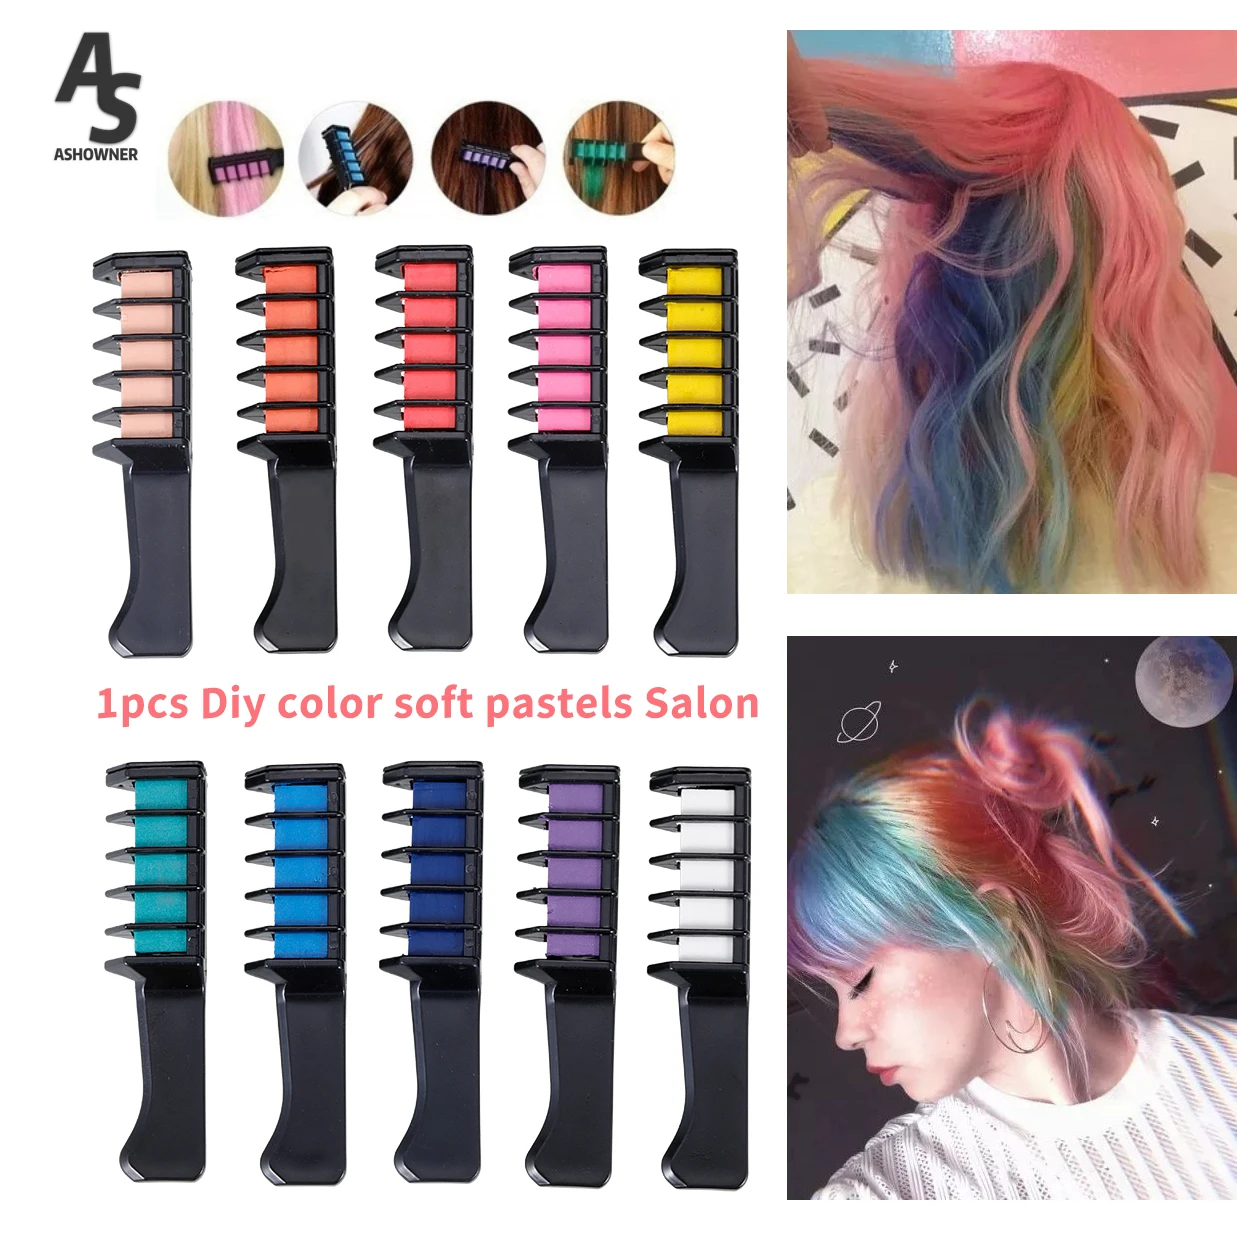 10 Color Hair Chalk for Girls Makeup Kit Comb Temporary Washable Hair Color  Dye for Kids Birthday Halloween Christmas Gifts - AliExpress